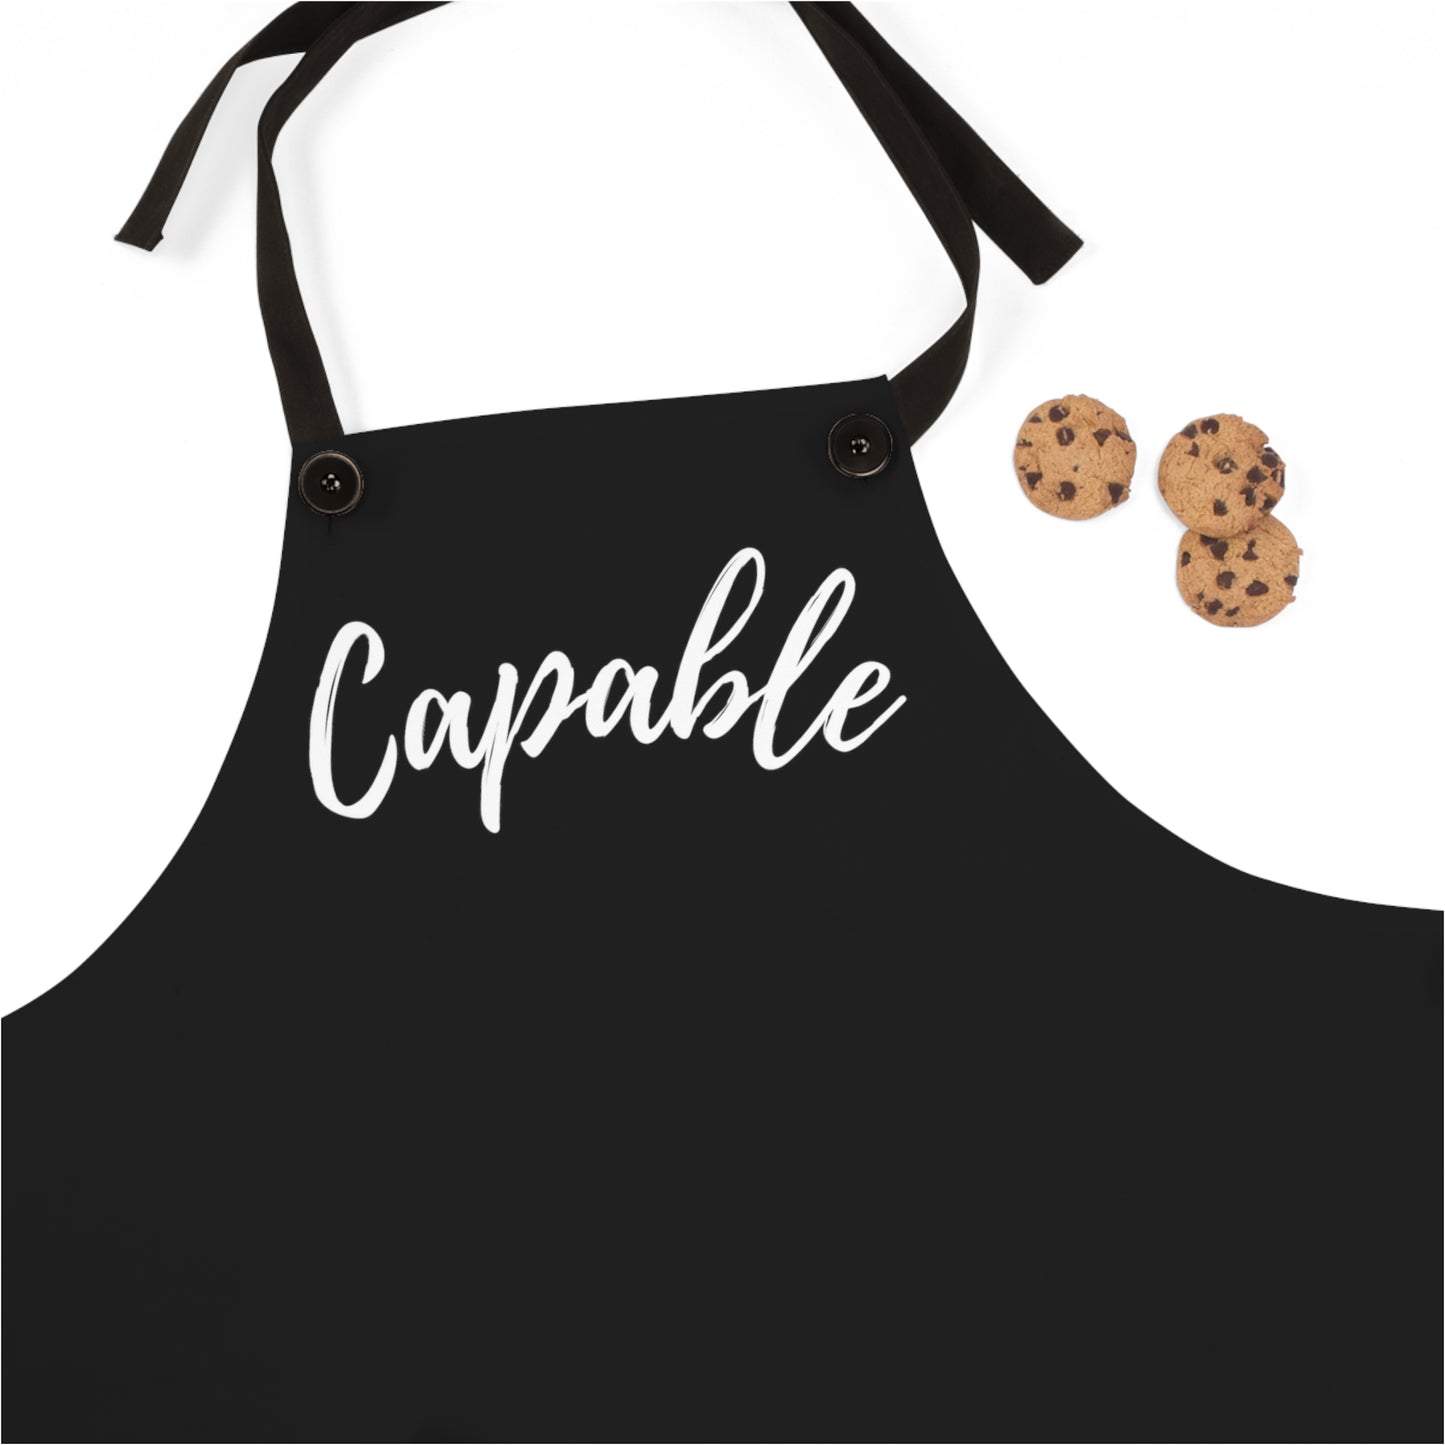 Capable Apron Black with White Lettering